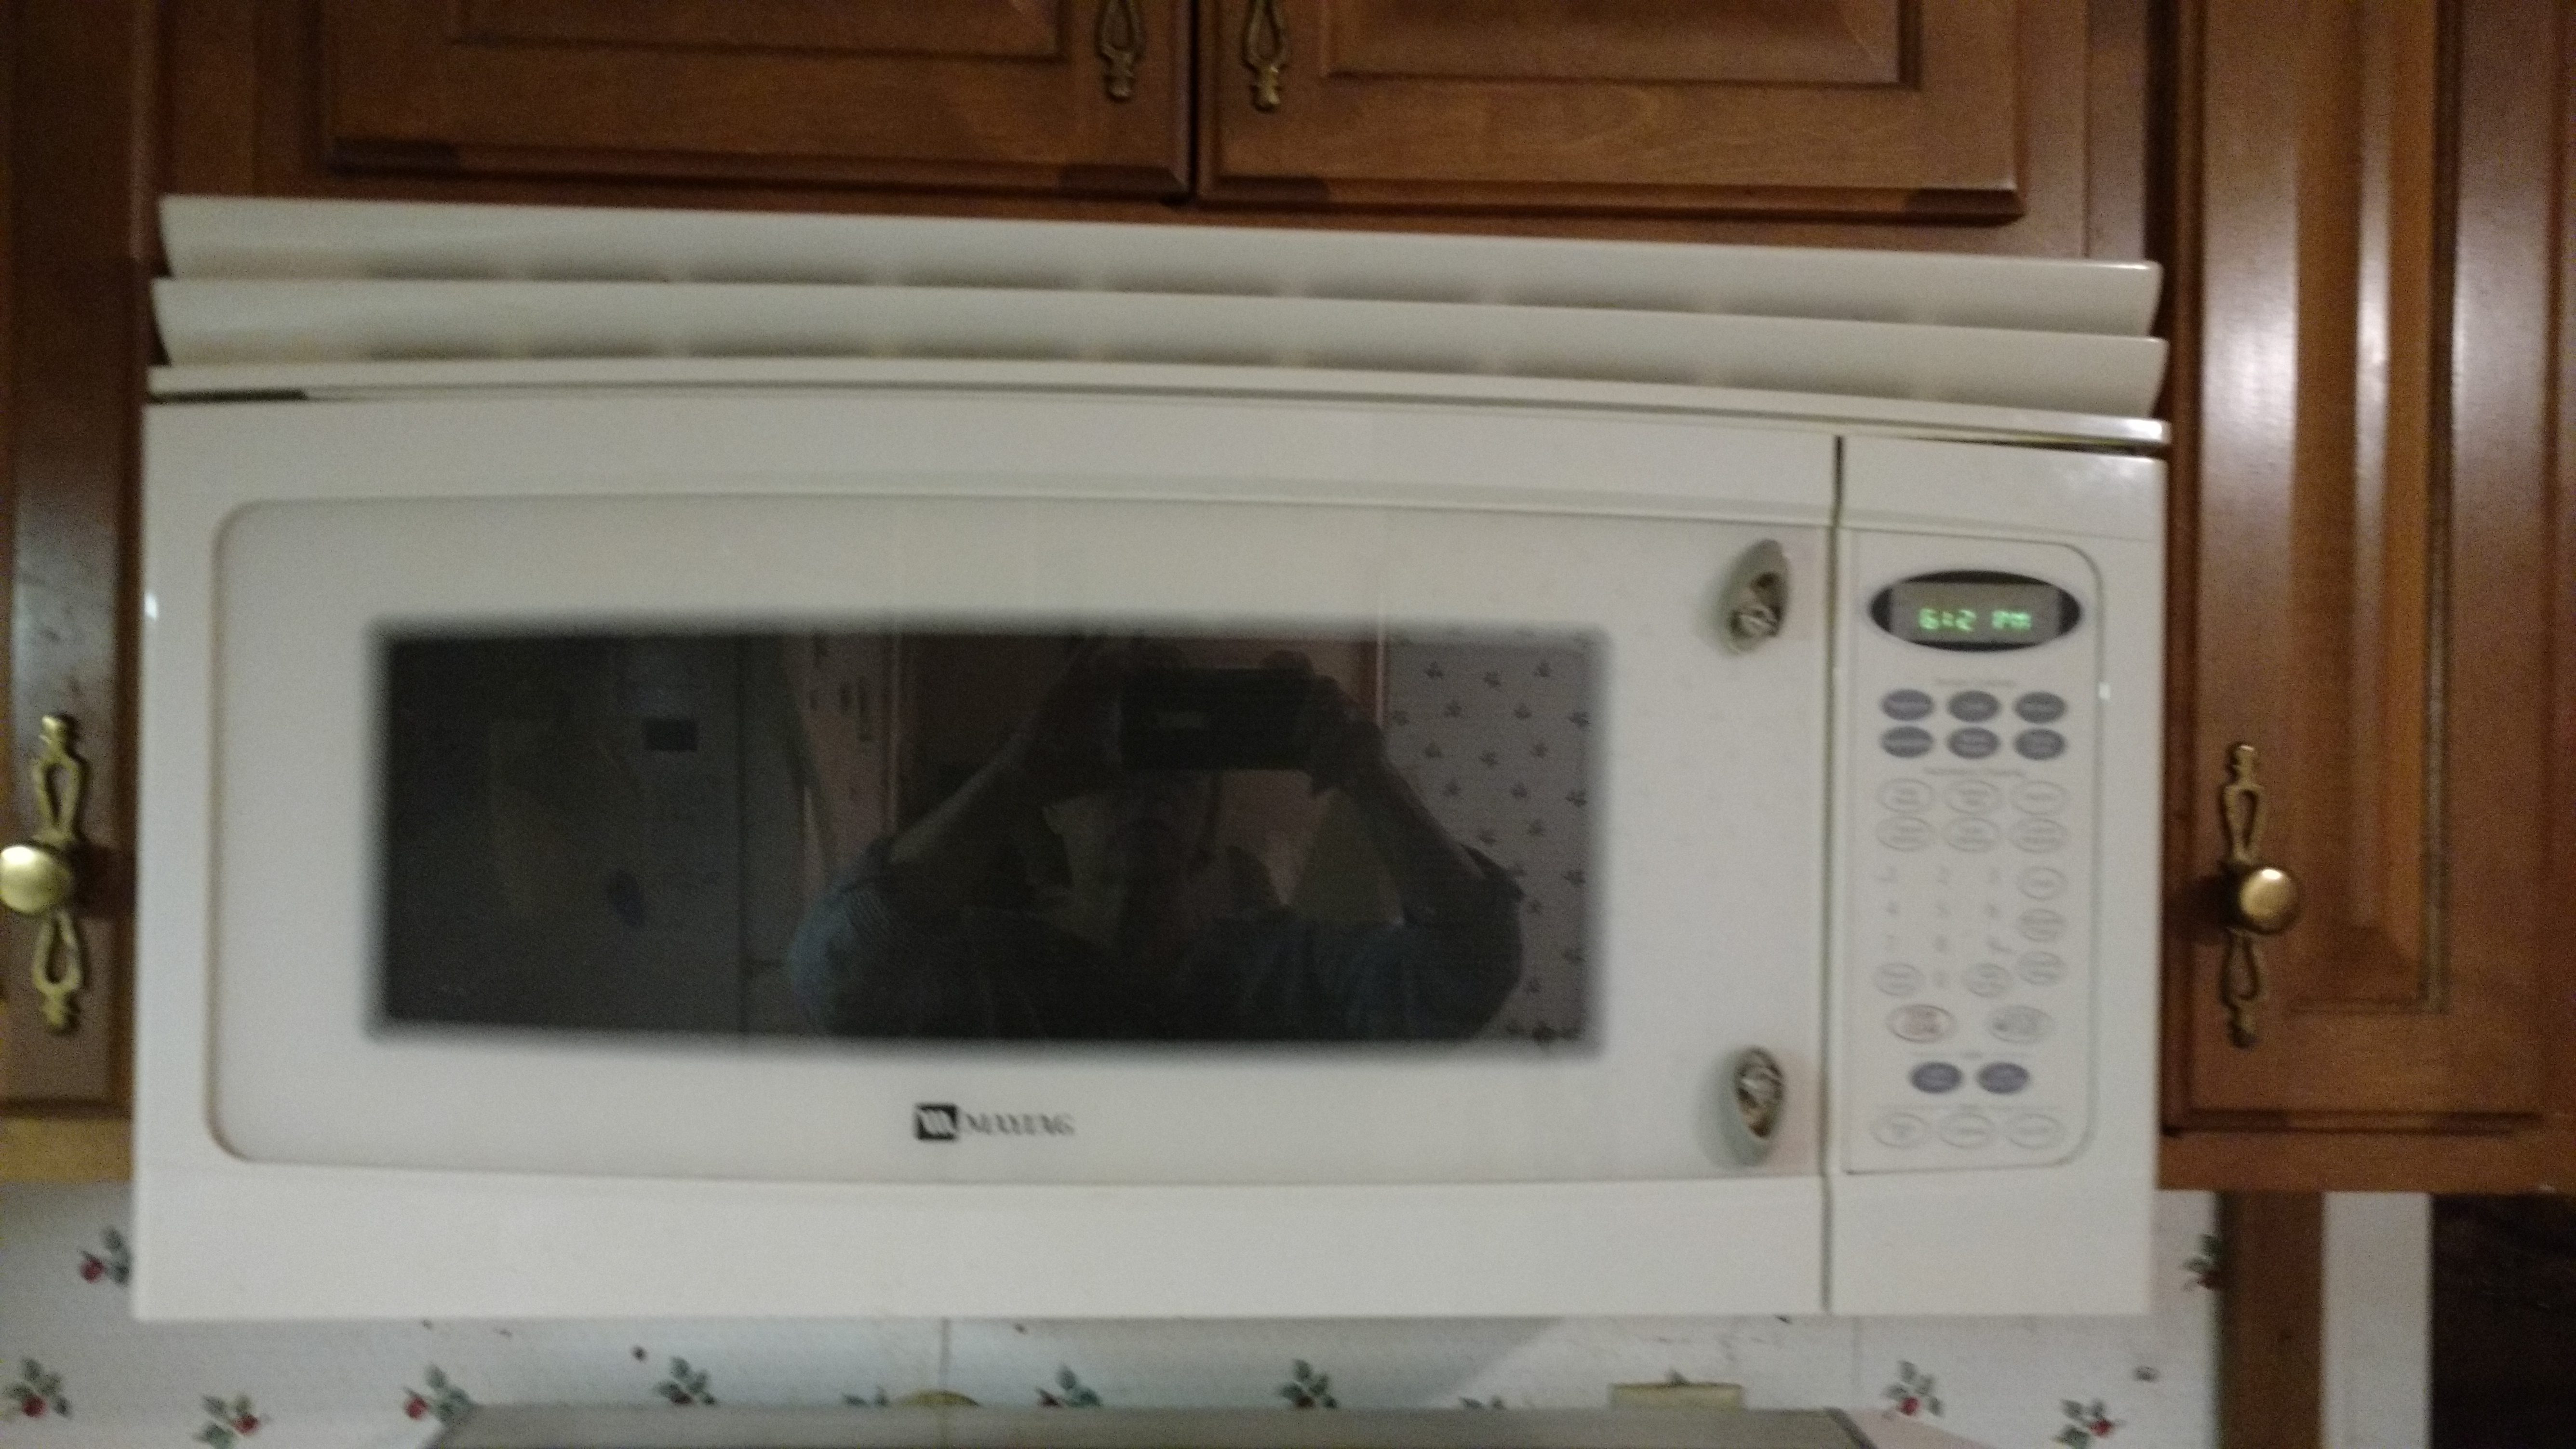 Top 139 Complaints and Reviews about Maytag Microwaves